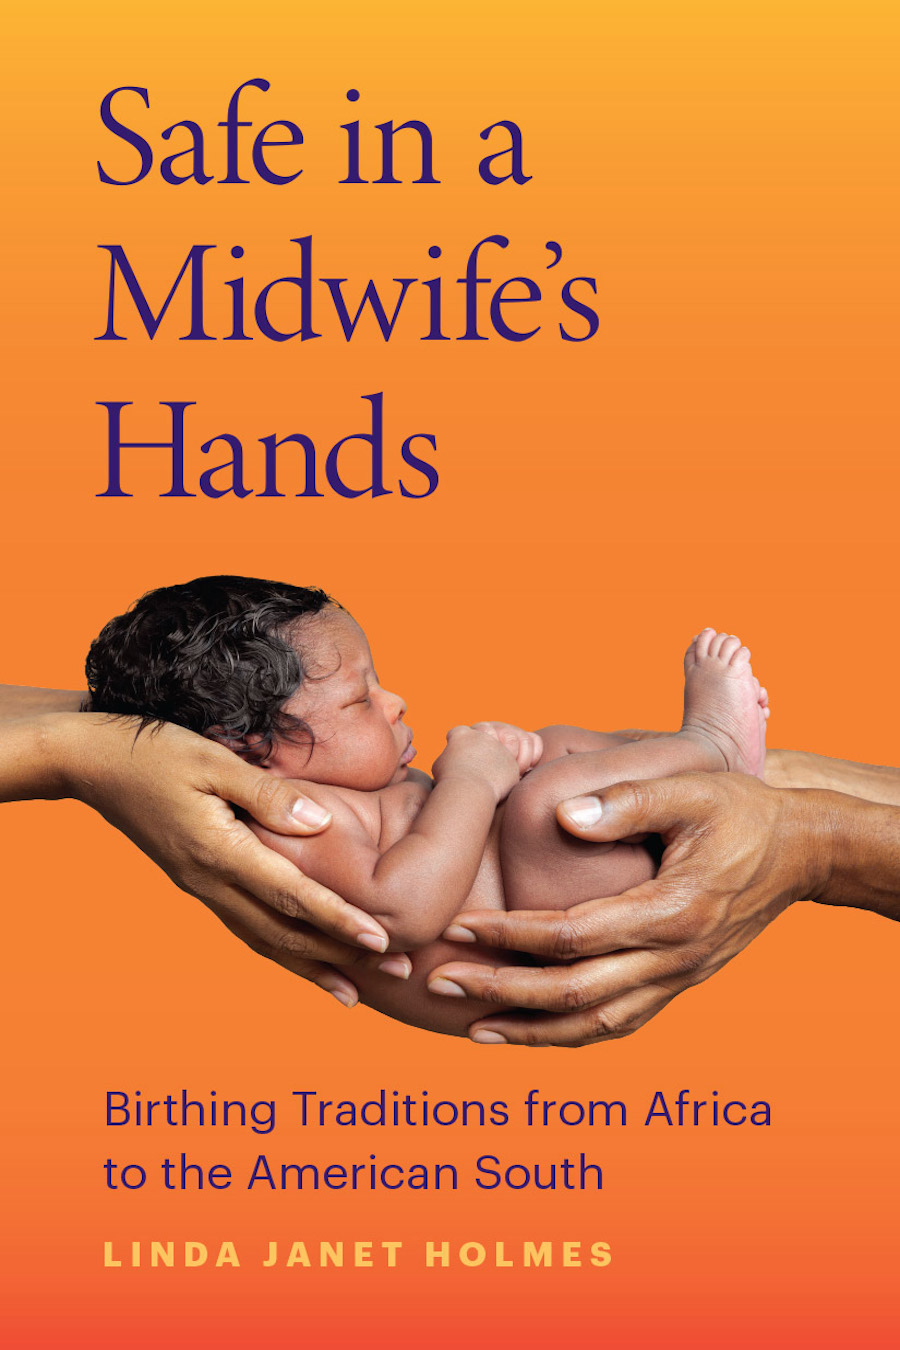 Front cover of Safe in a Midwife’s Hands: Birthing Traditions from Africa to the American South, by Linda Janet Holmes, featuring a photo of a Black infant being cradled by two sets of Black hands.